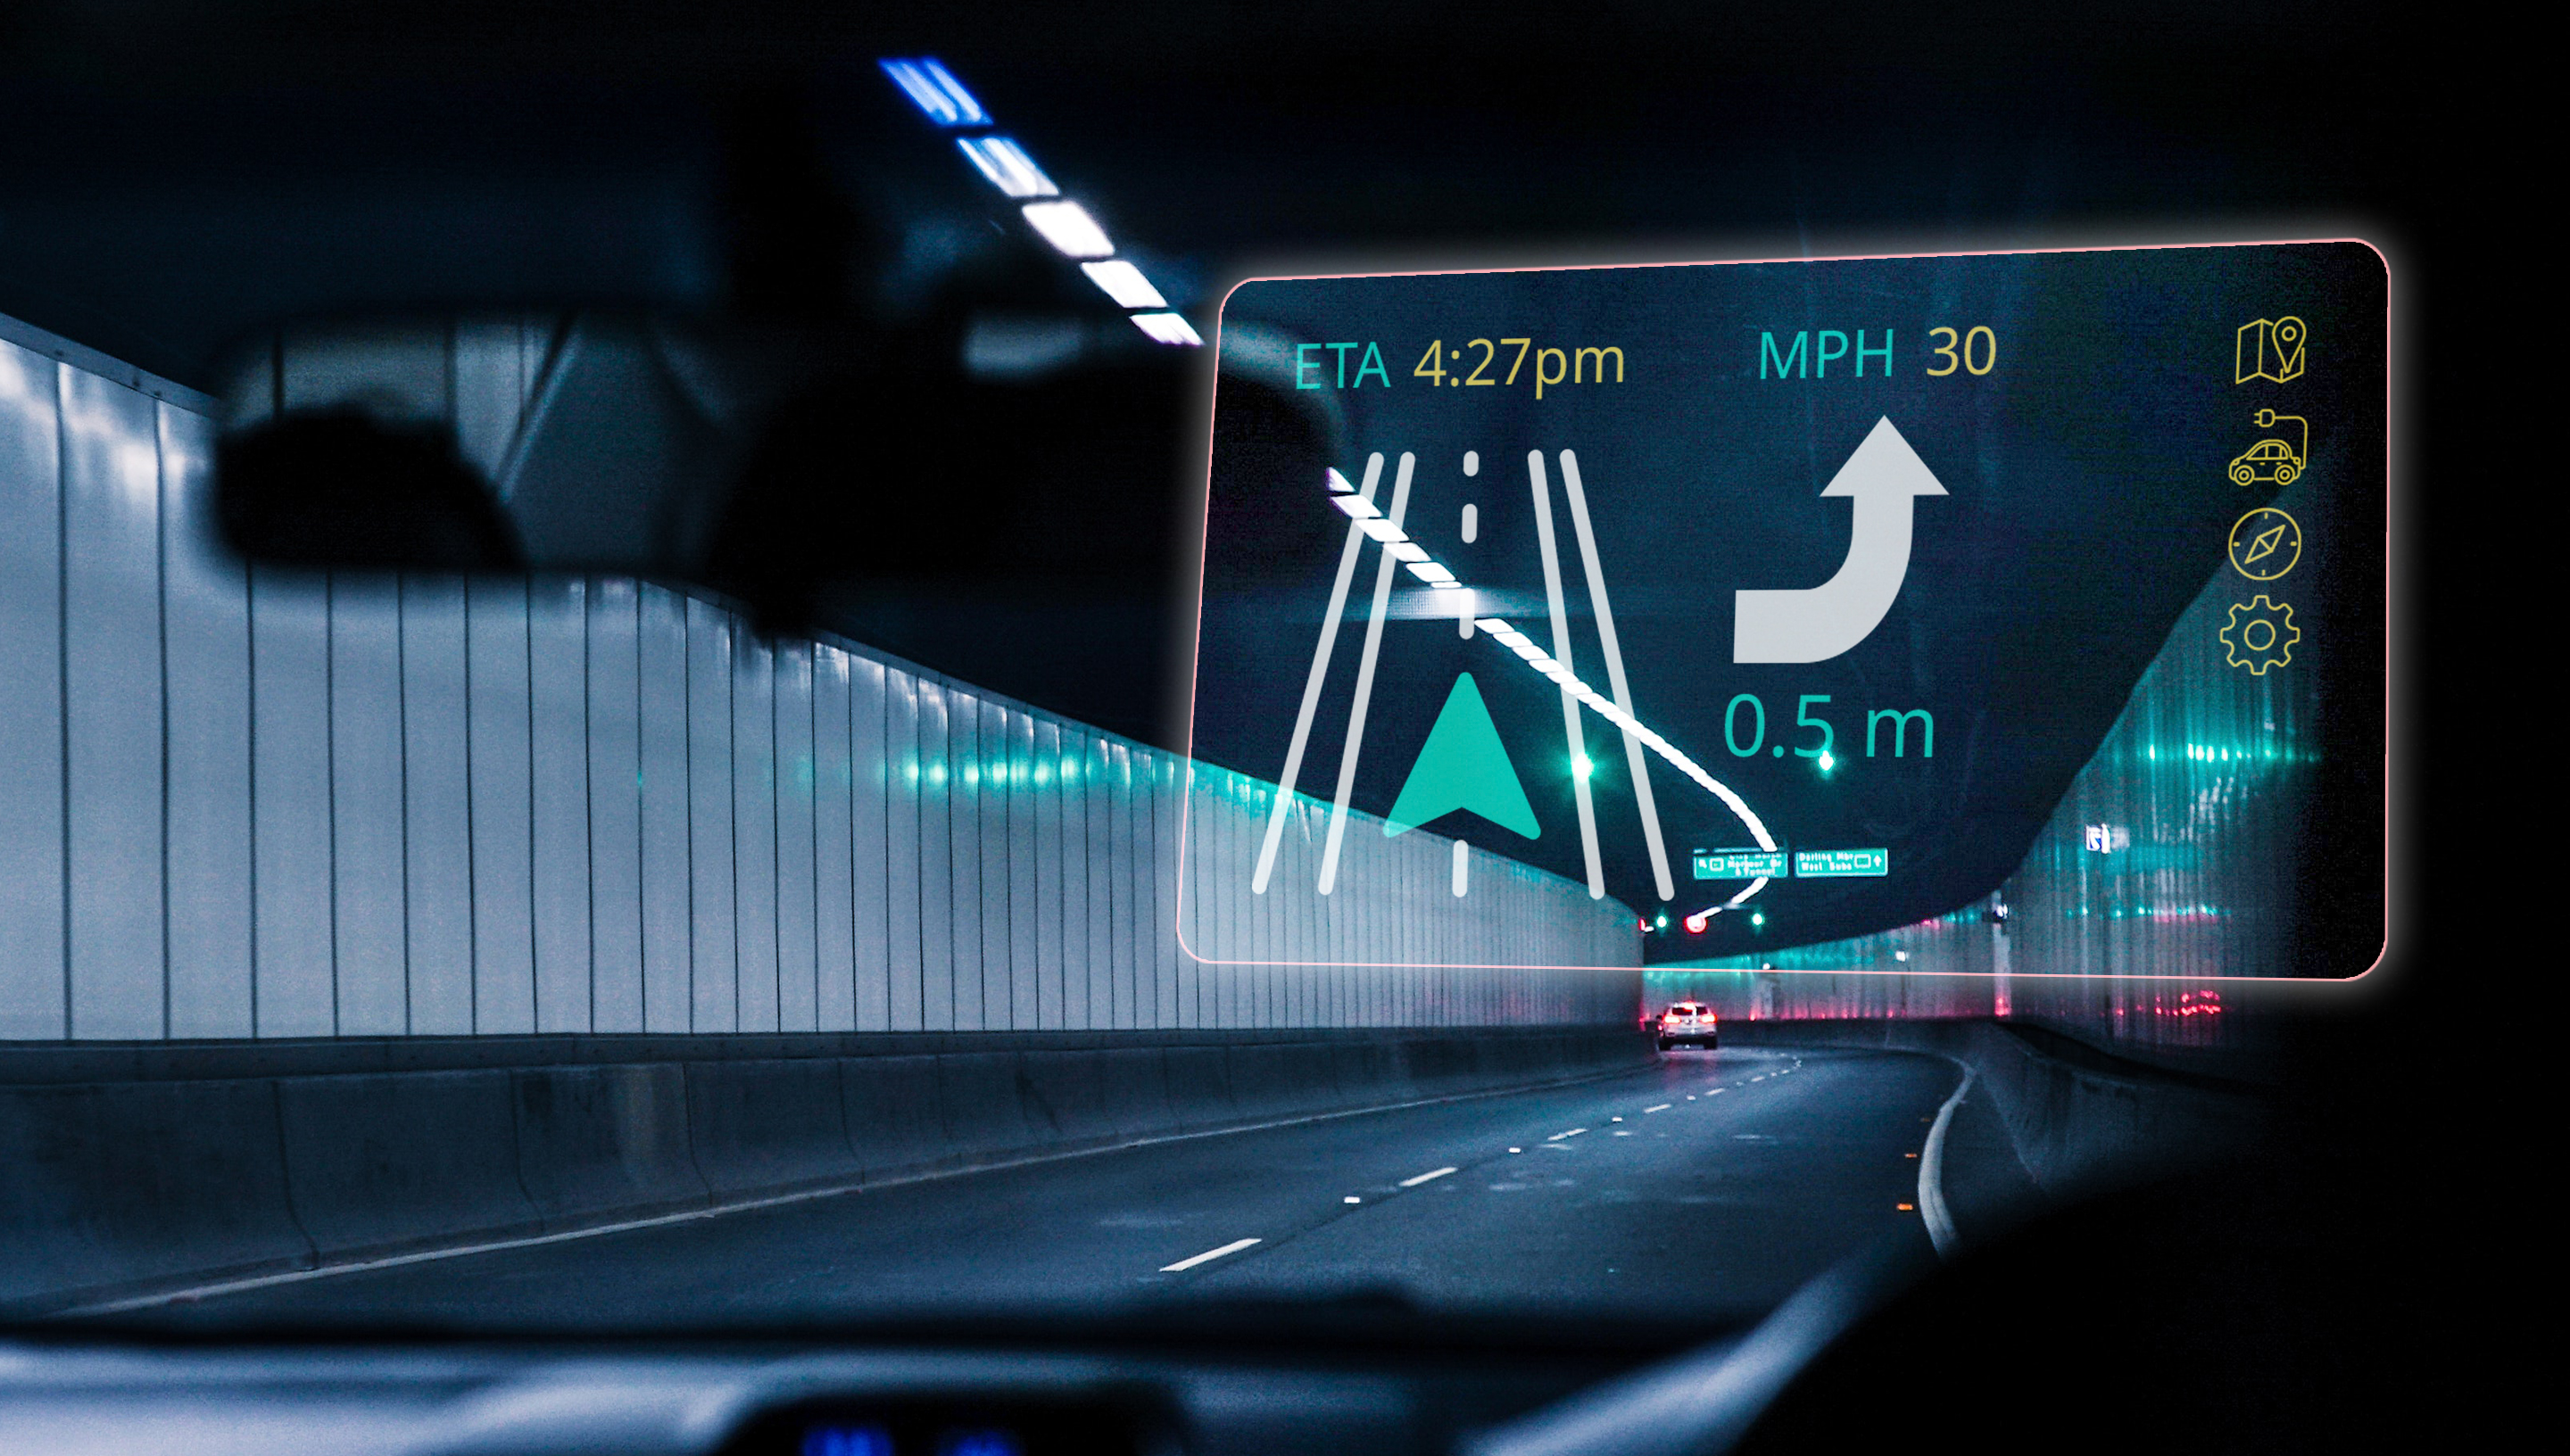 View from Driver’s seat, driving in a tunnel, with a personalized dashboard projected on the windshield.